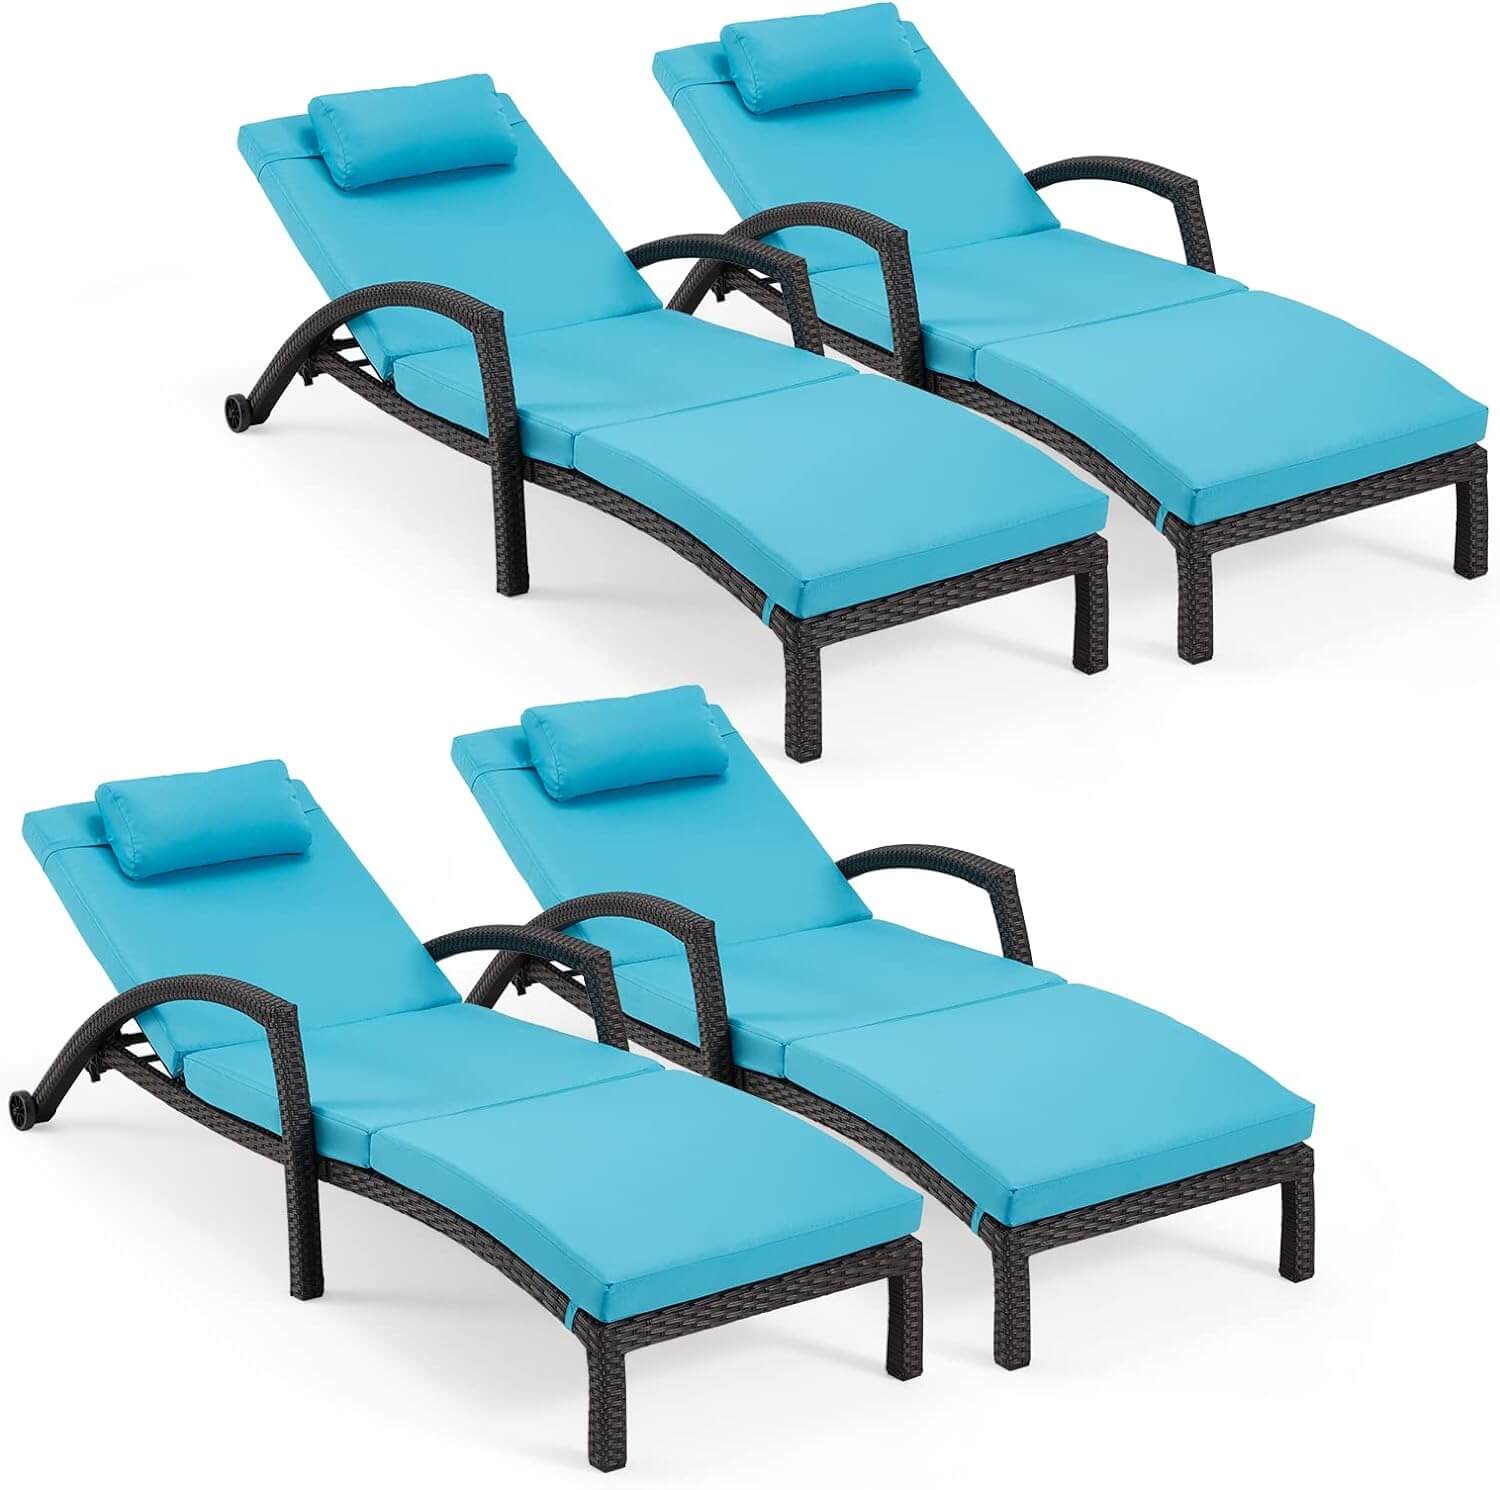 homrest-chaise-lounge-chairs-set-of-4-for-outside-blue